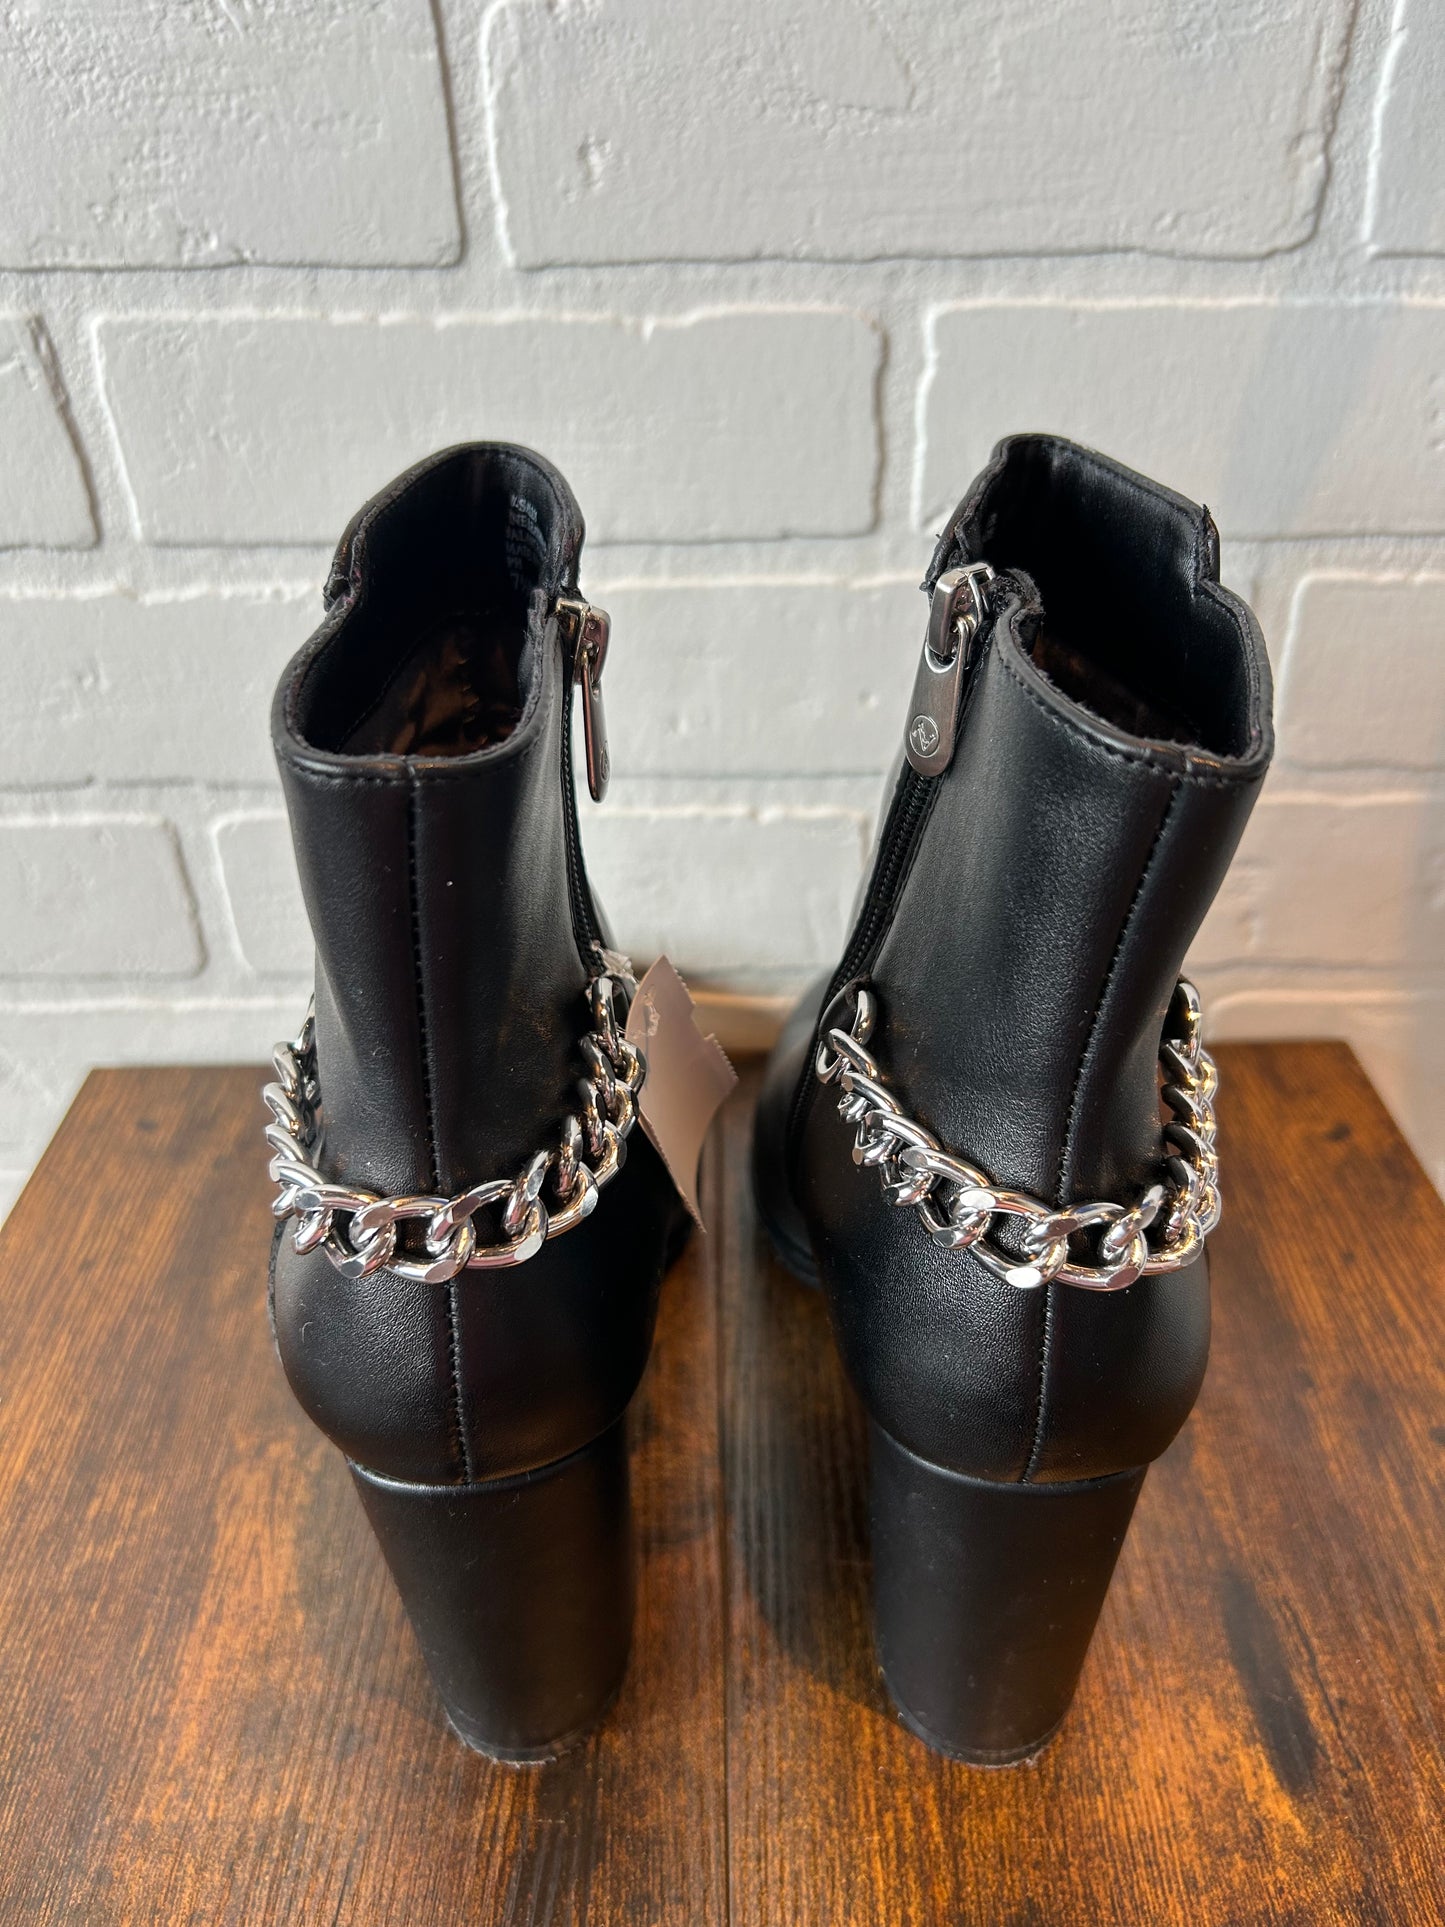 Boots Mid-calf Heels By Adrienne Vittadini  Size: 7.5